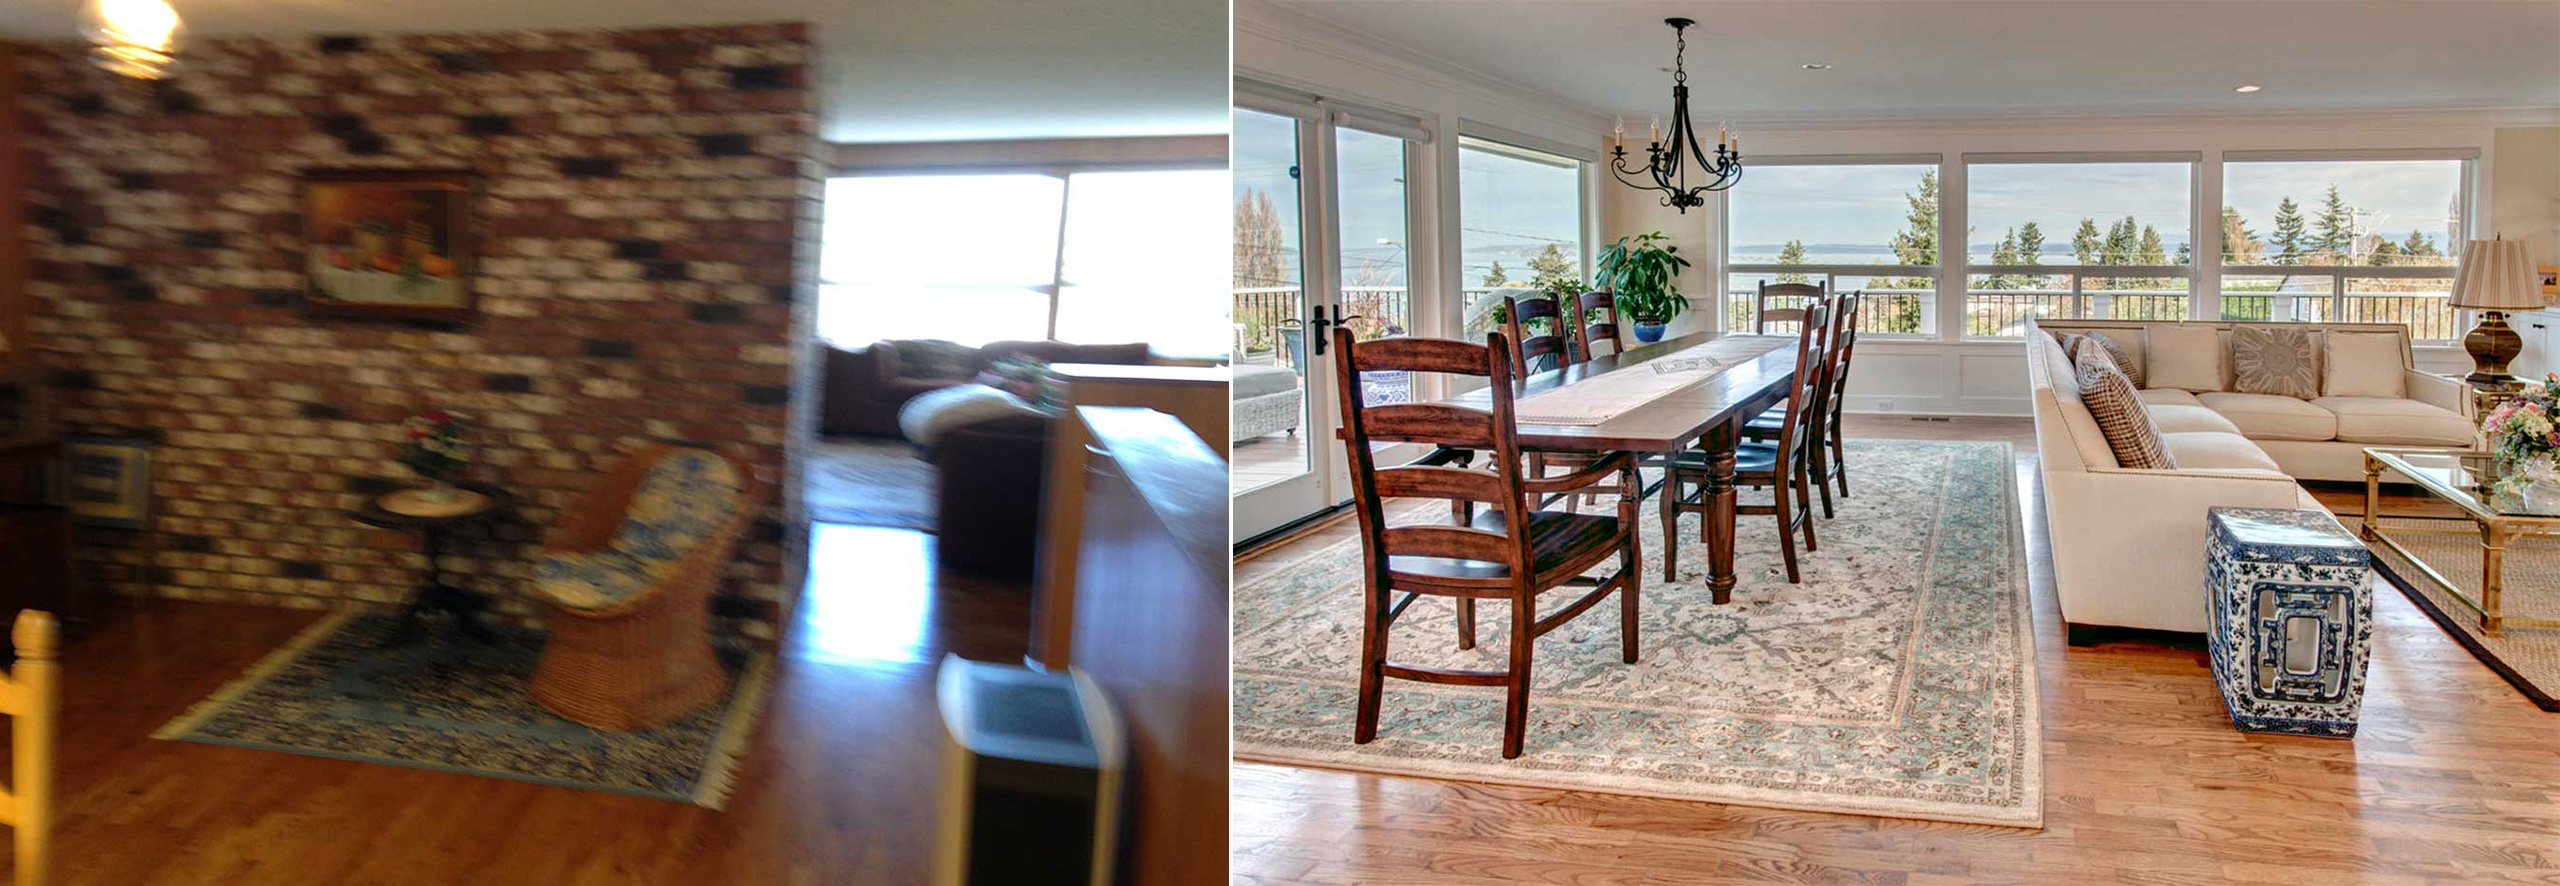 Remodel of a 1960s Home – Sound Landing: Before & After: Dining Room – Board & Vellum